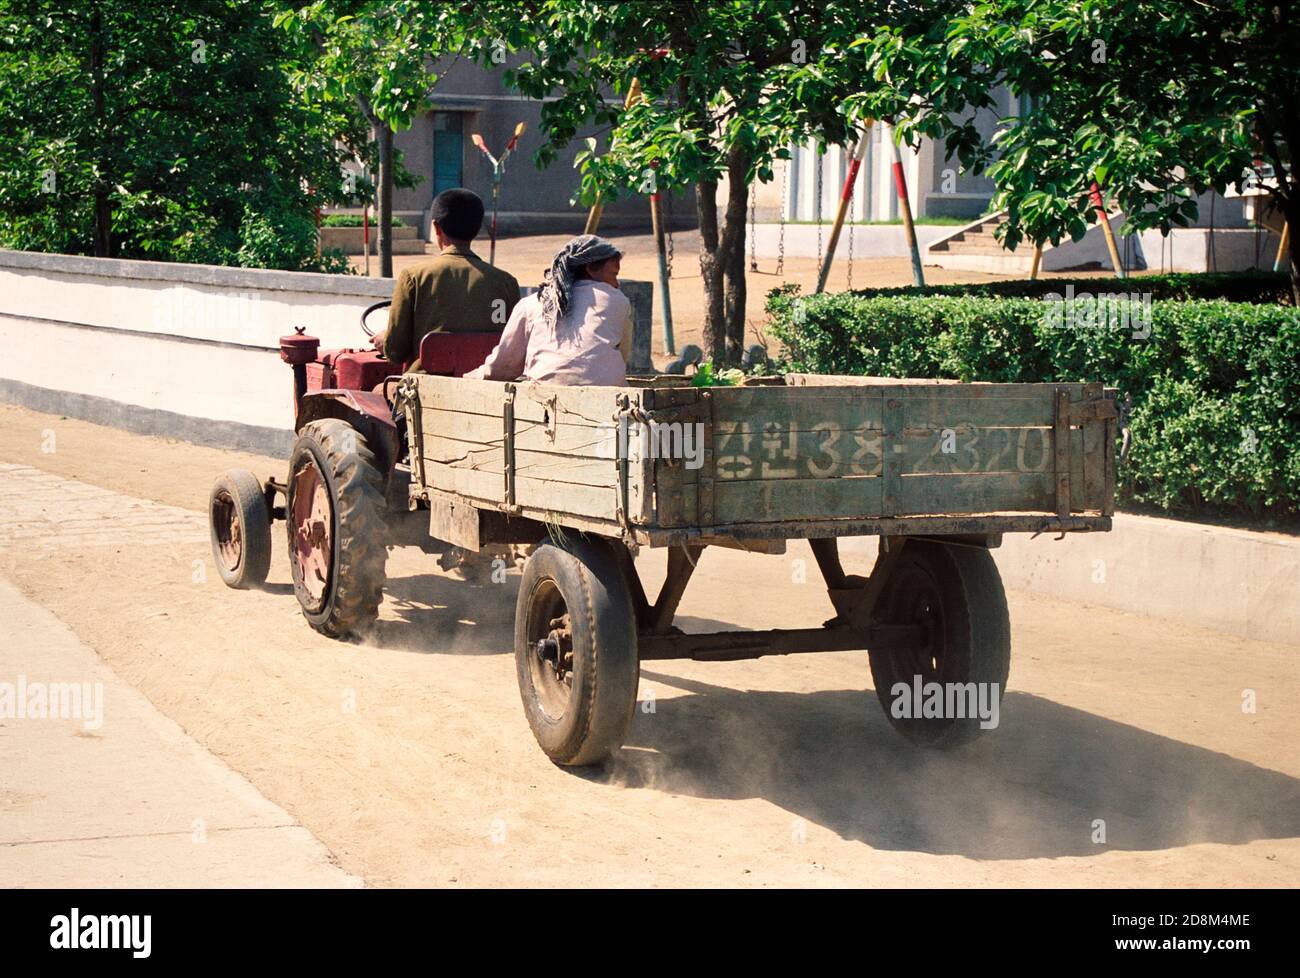 Old tractor and trailer at a collective farm near Wonsan, North Korea Stock Photo